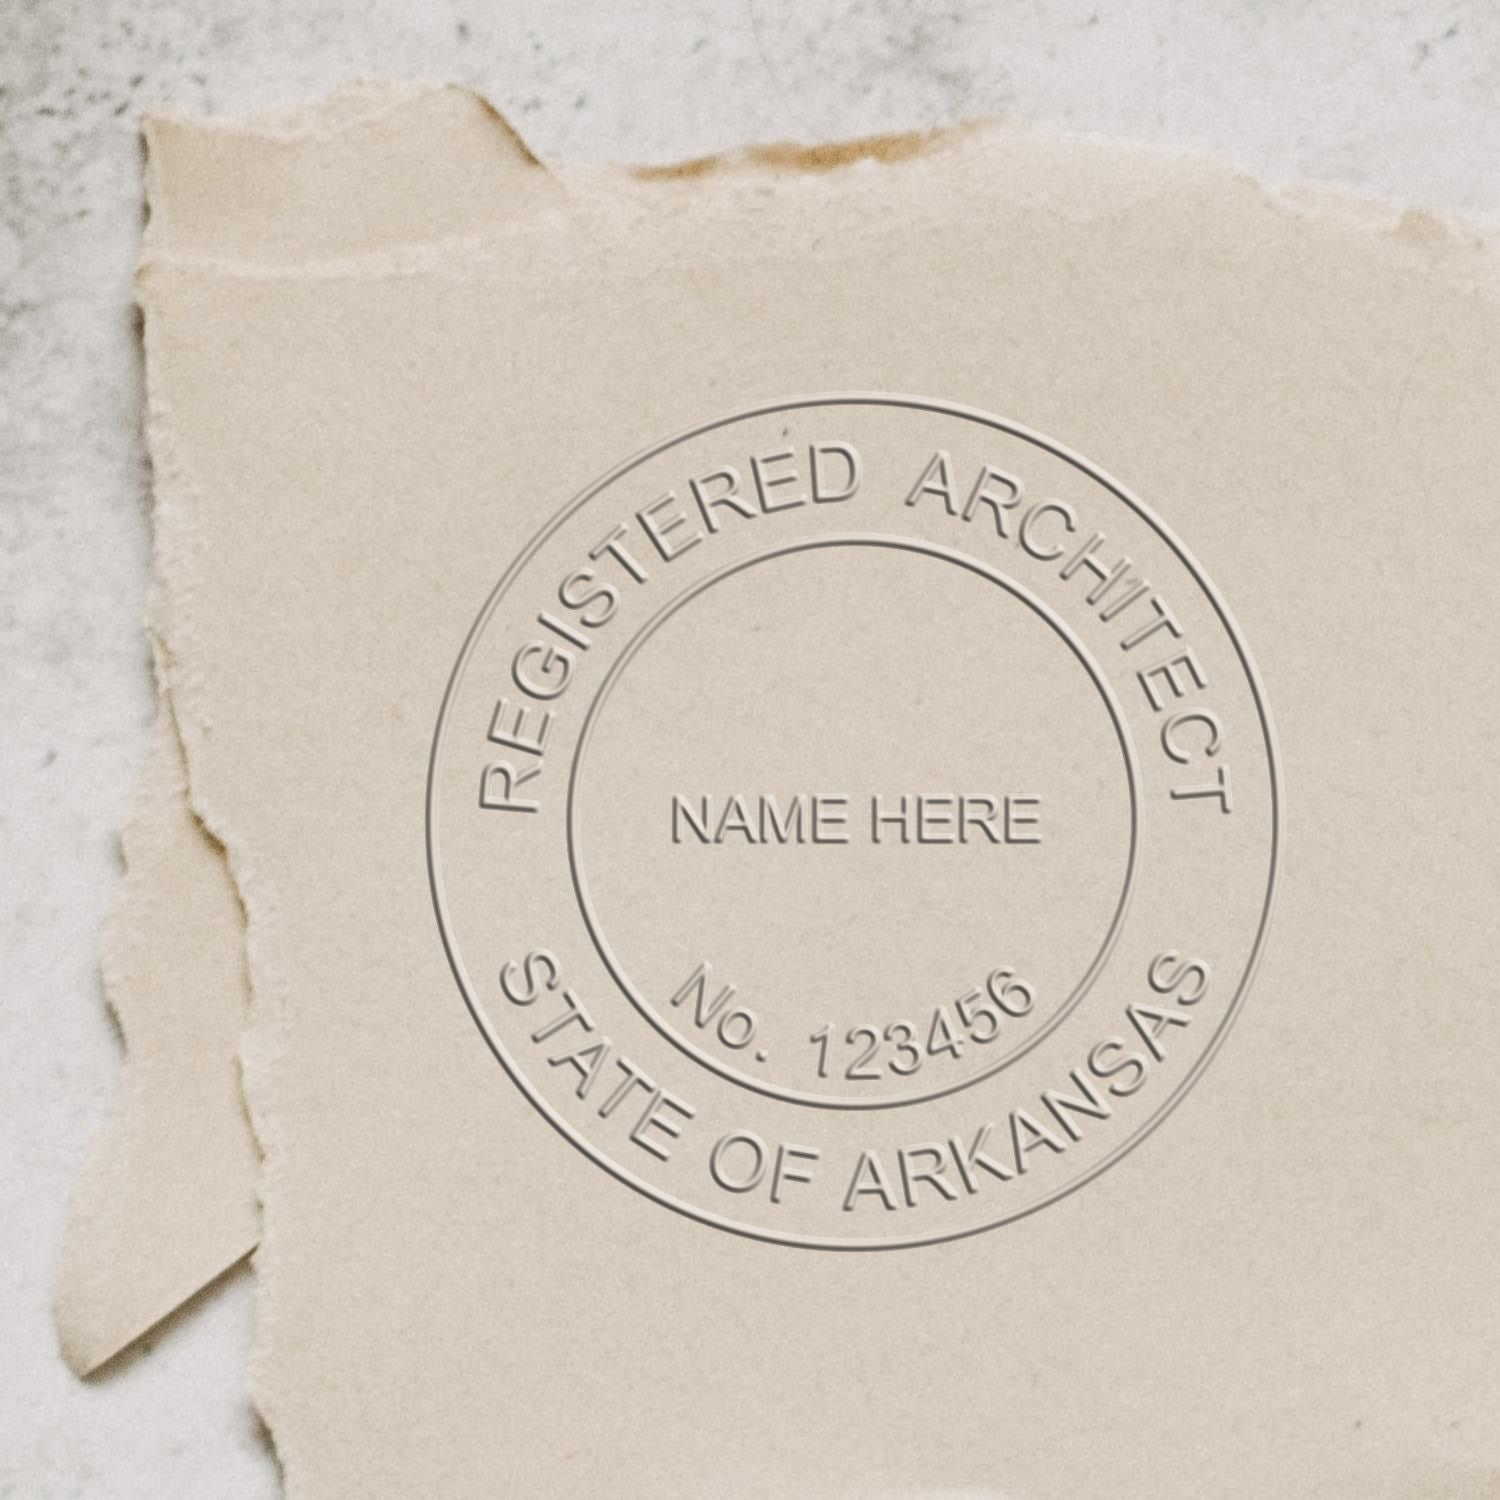 A lifestyle photo showing a stamped image of the Arkansas Desk Architect Embossing Seal on a piece of paper